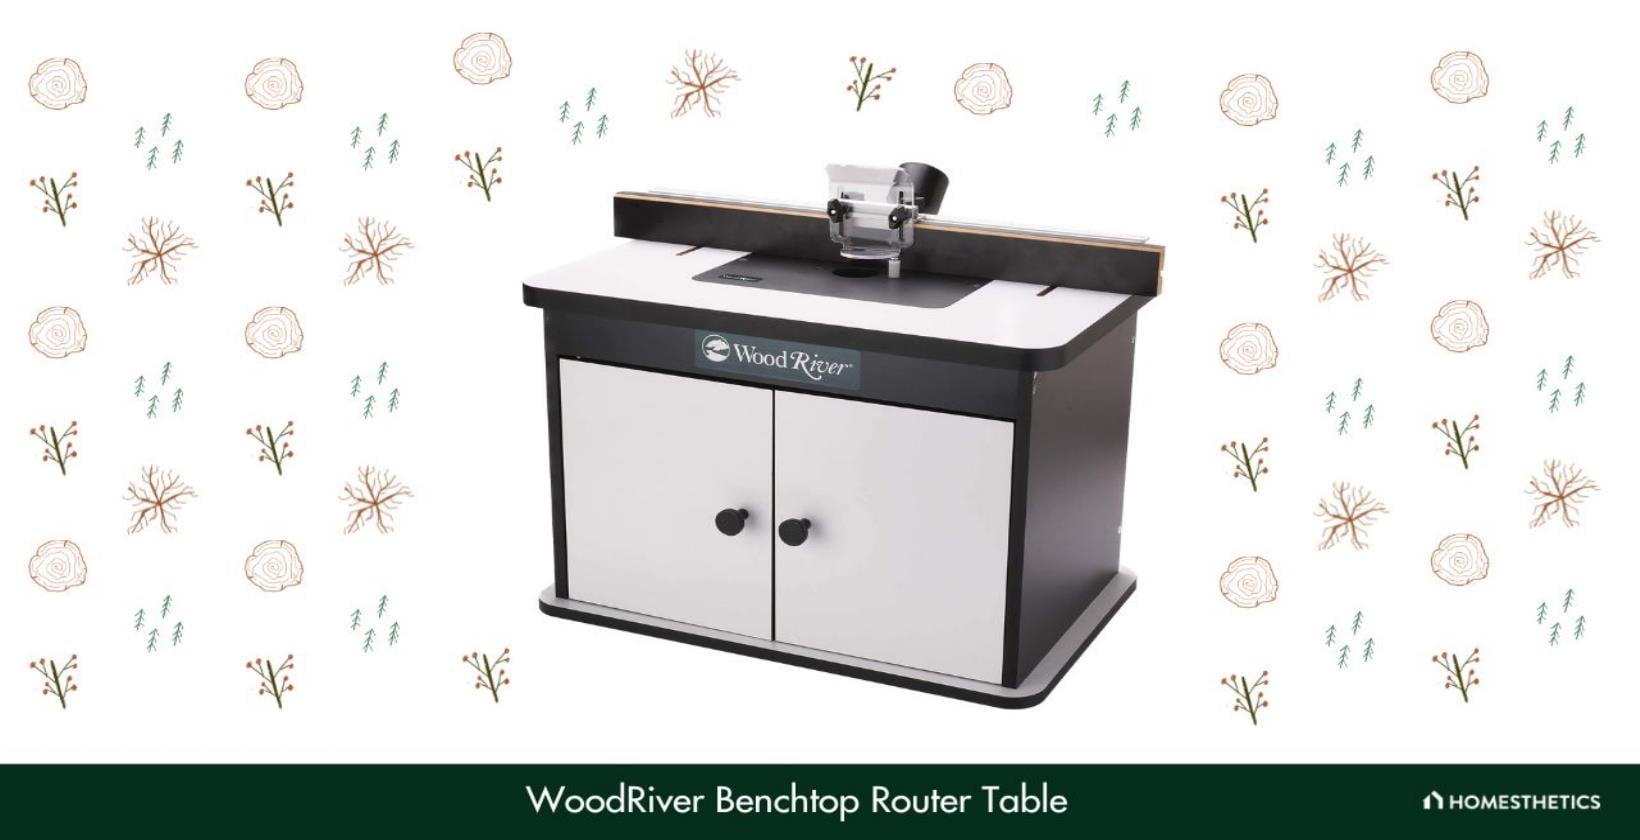 7. WoodRiver Benchtop Router Table